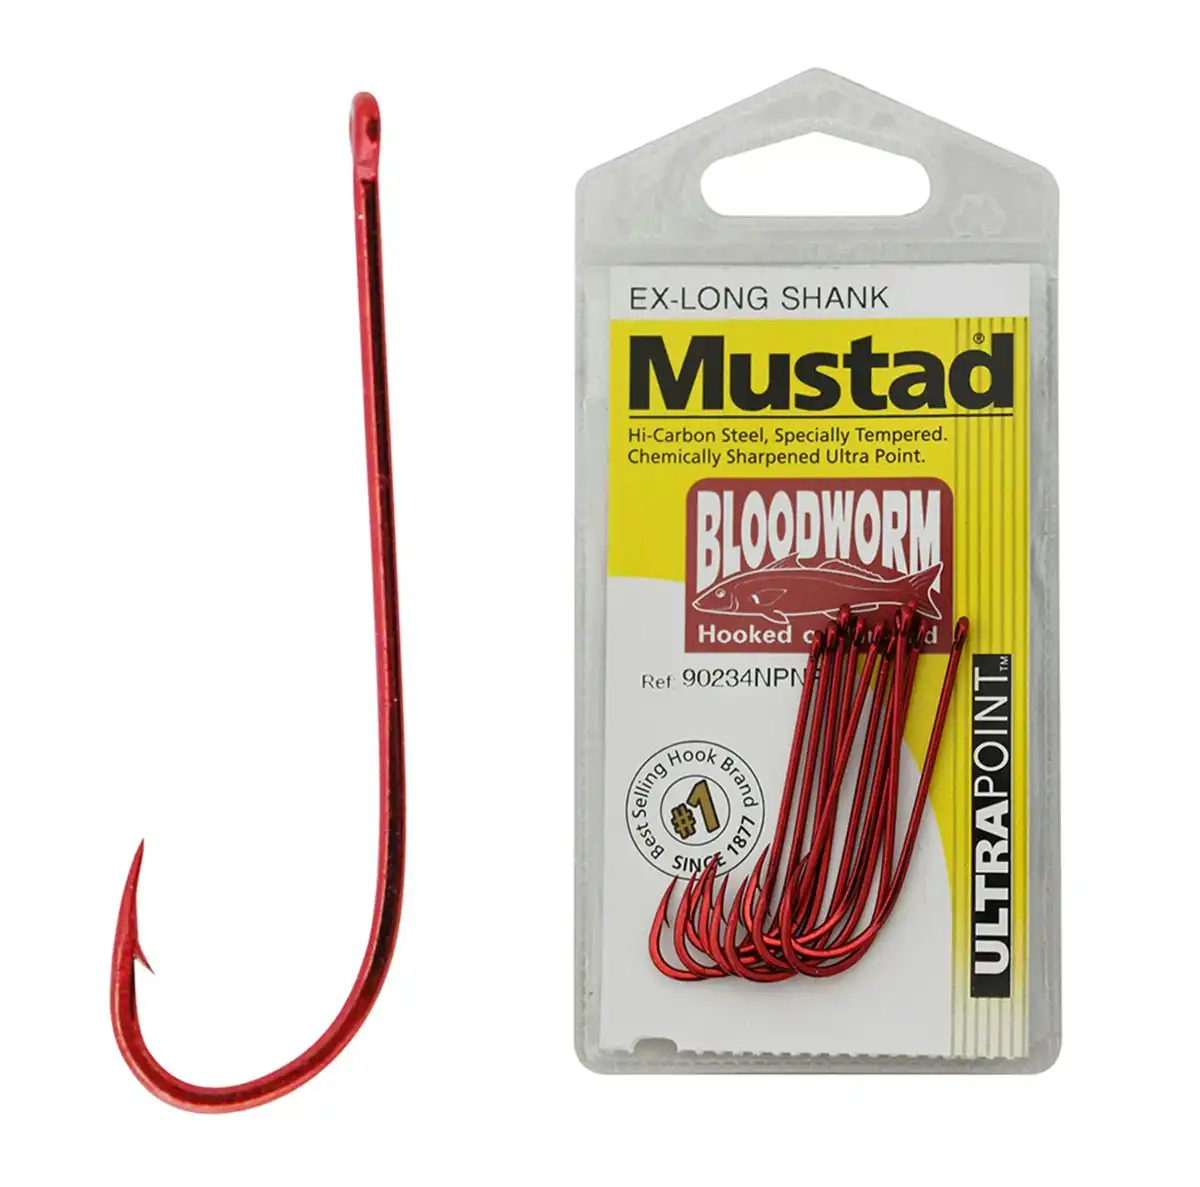 1 Packet of Mustad 90234NPNR Bloodworm Chemically Sharp Fishing Hooks